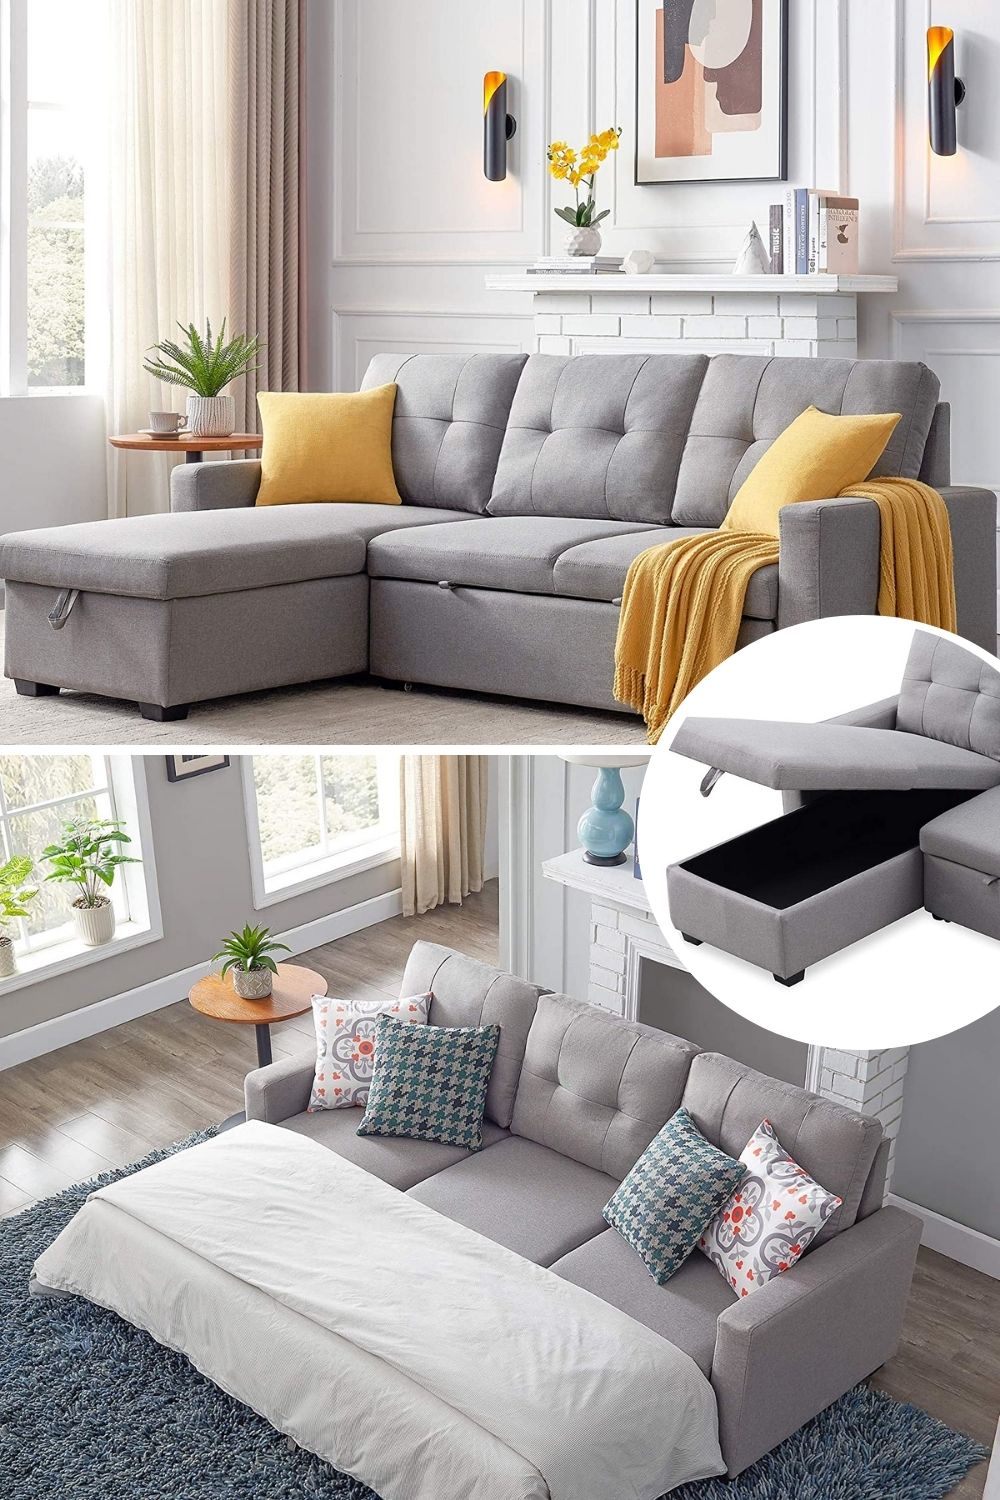 7 Perfect Stylish Sleeper Sectionals For Small Spaces!